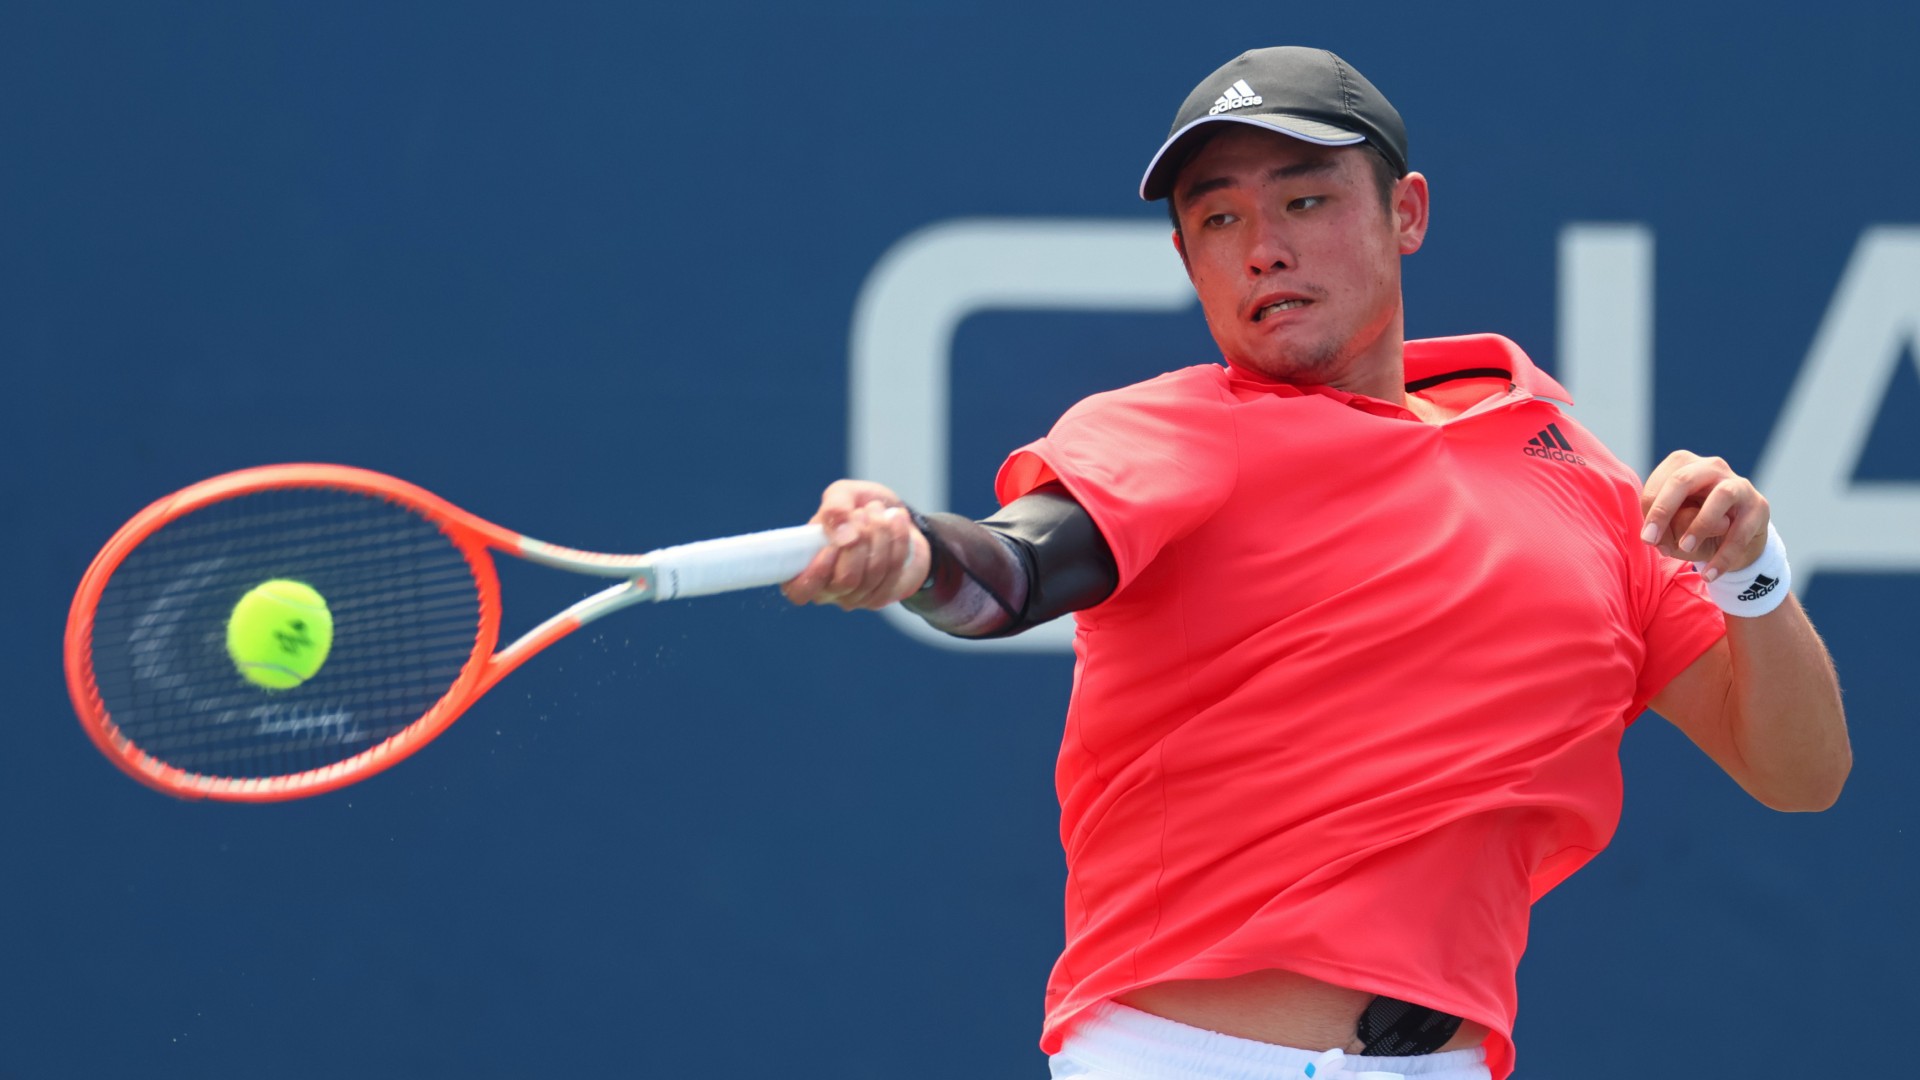 Yibing Wu Makes History as First Chinese Man to Qualify for US Open Mens Singles